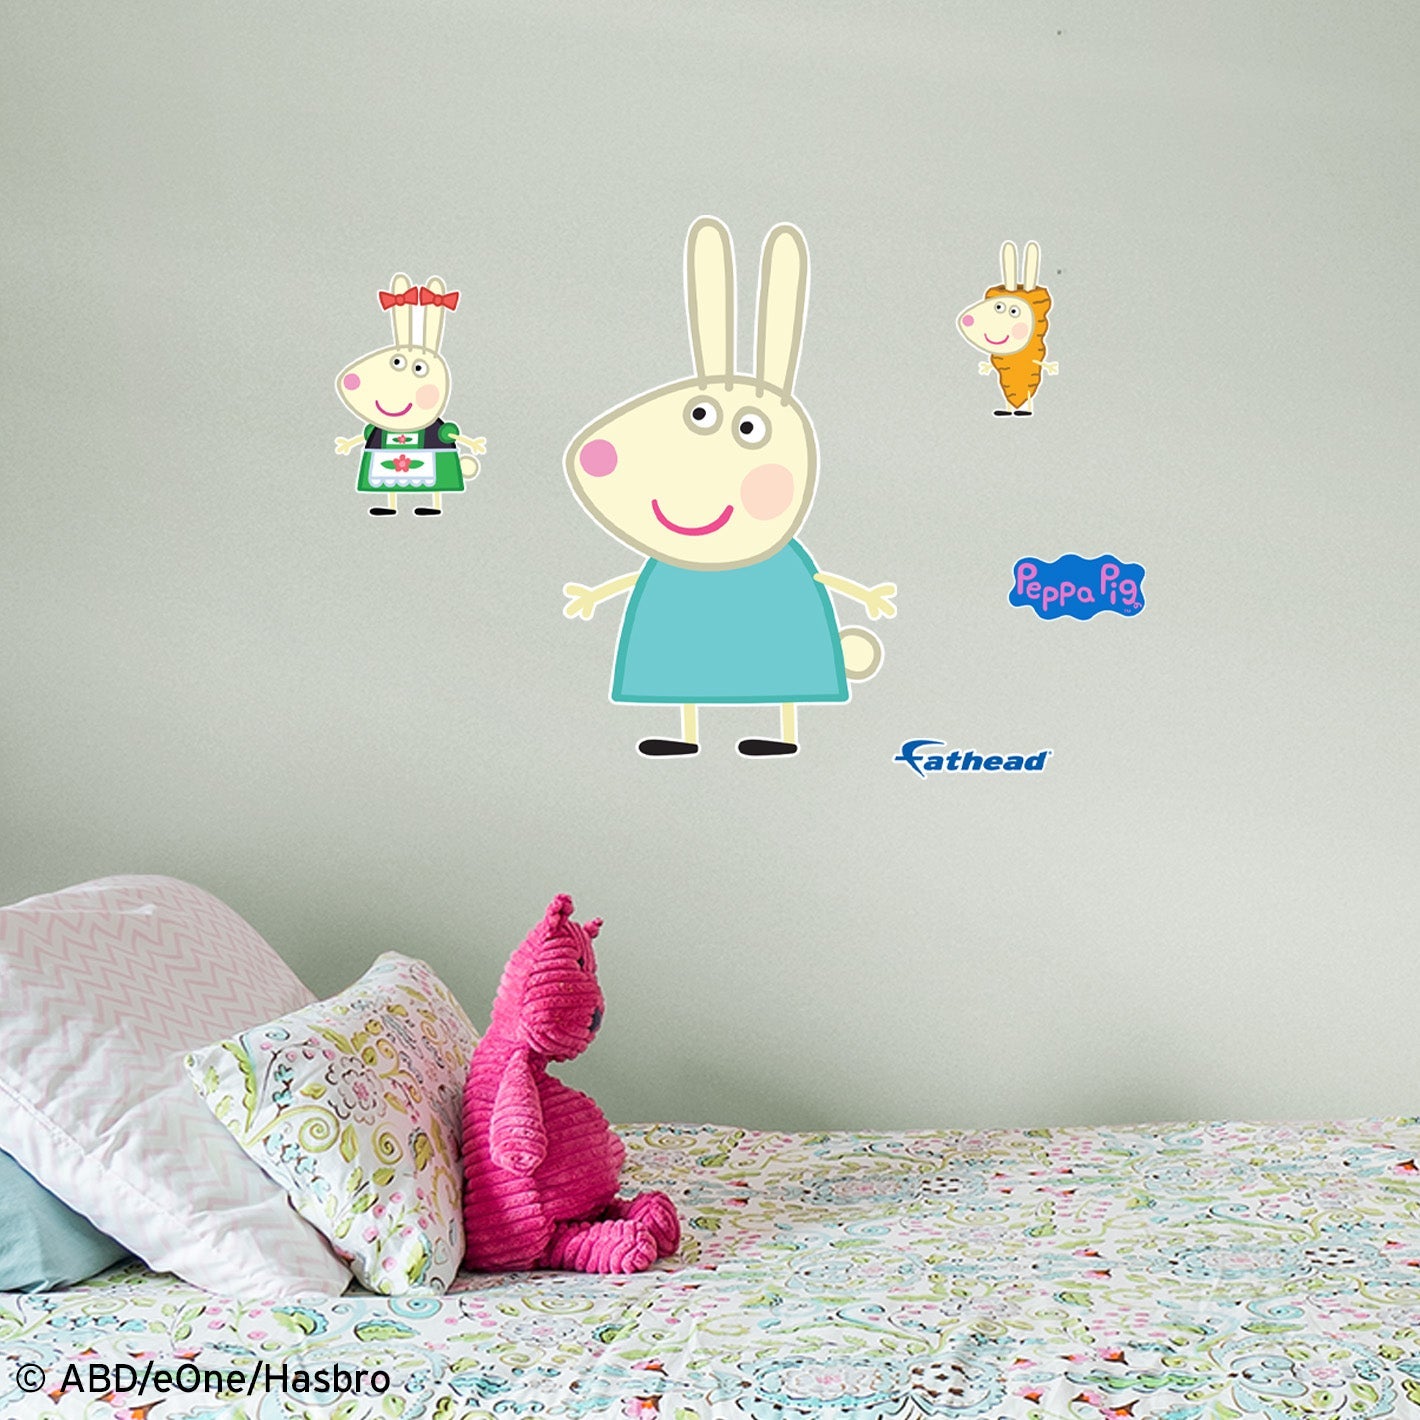 Peppa Pig: Rebecca RealBigs - Officially Licensed Hasbro Removable Adhesive Decal